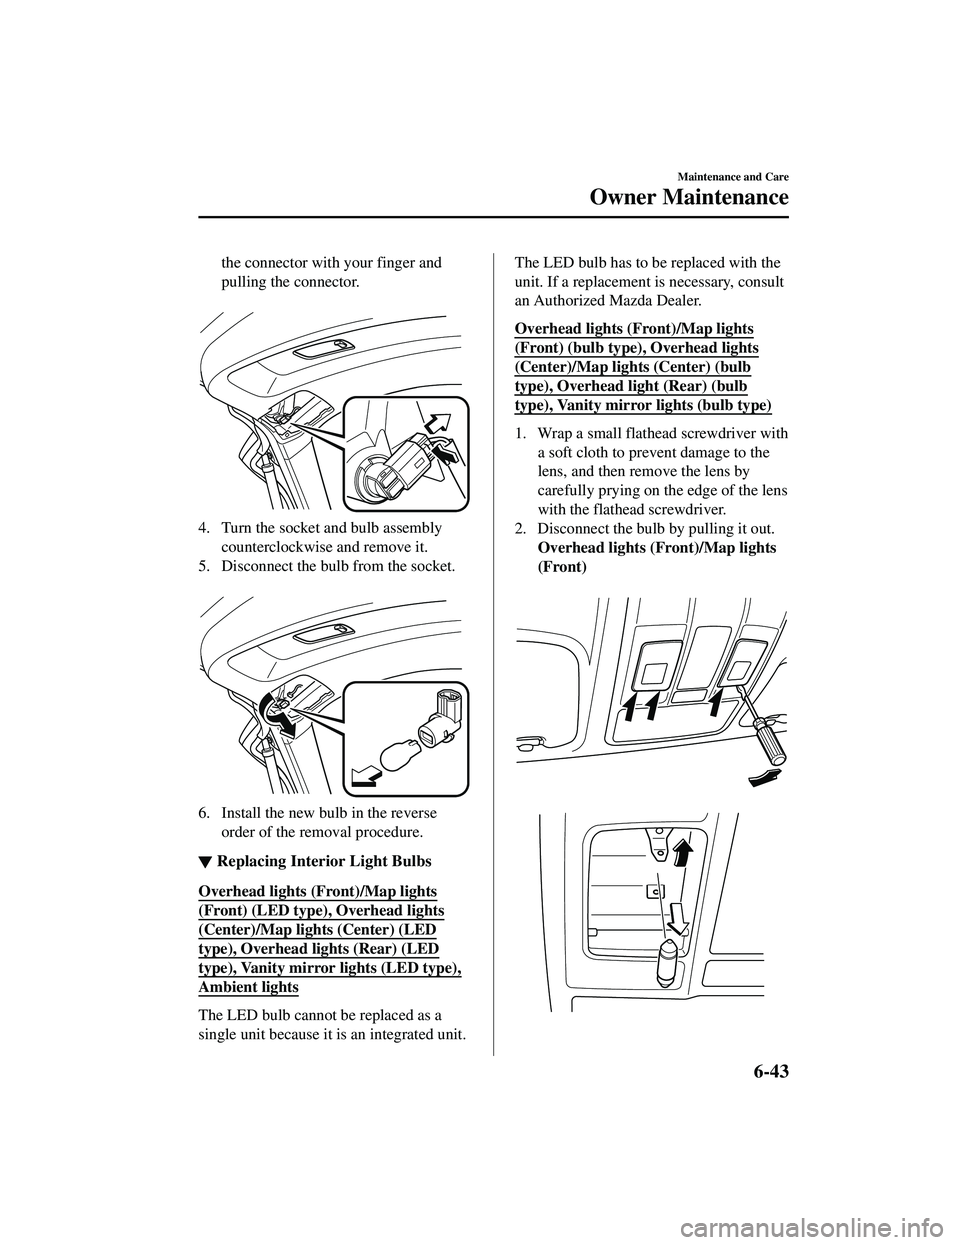 MAZDA MODEL CX-9 2021  Owners Manual the connector with your finger and
pulling the connector.
 
4. Turn the socket and bulb assemblycounterclockwise and remove it.
5. Disconnect the bulb from the socket.  
6. Install the new bulb in the